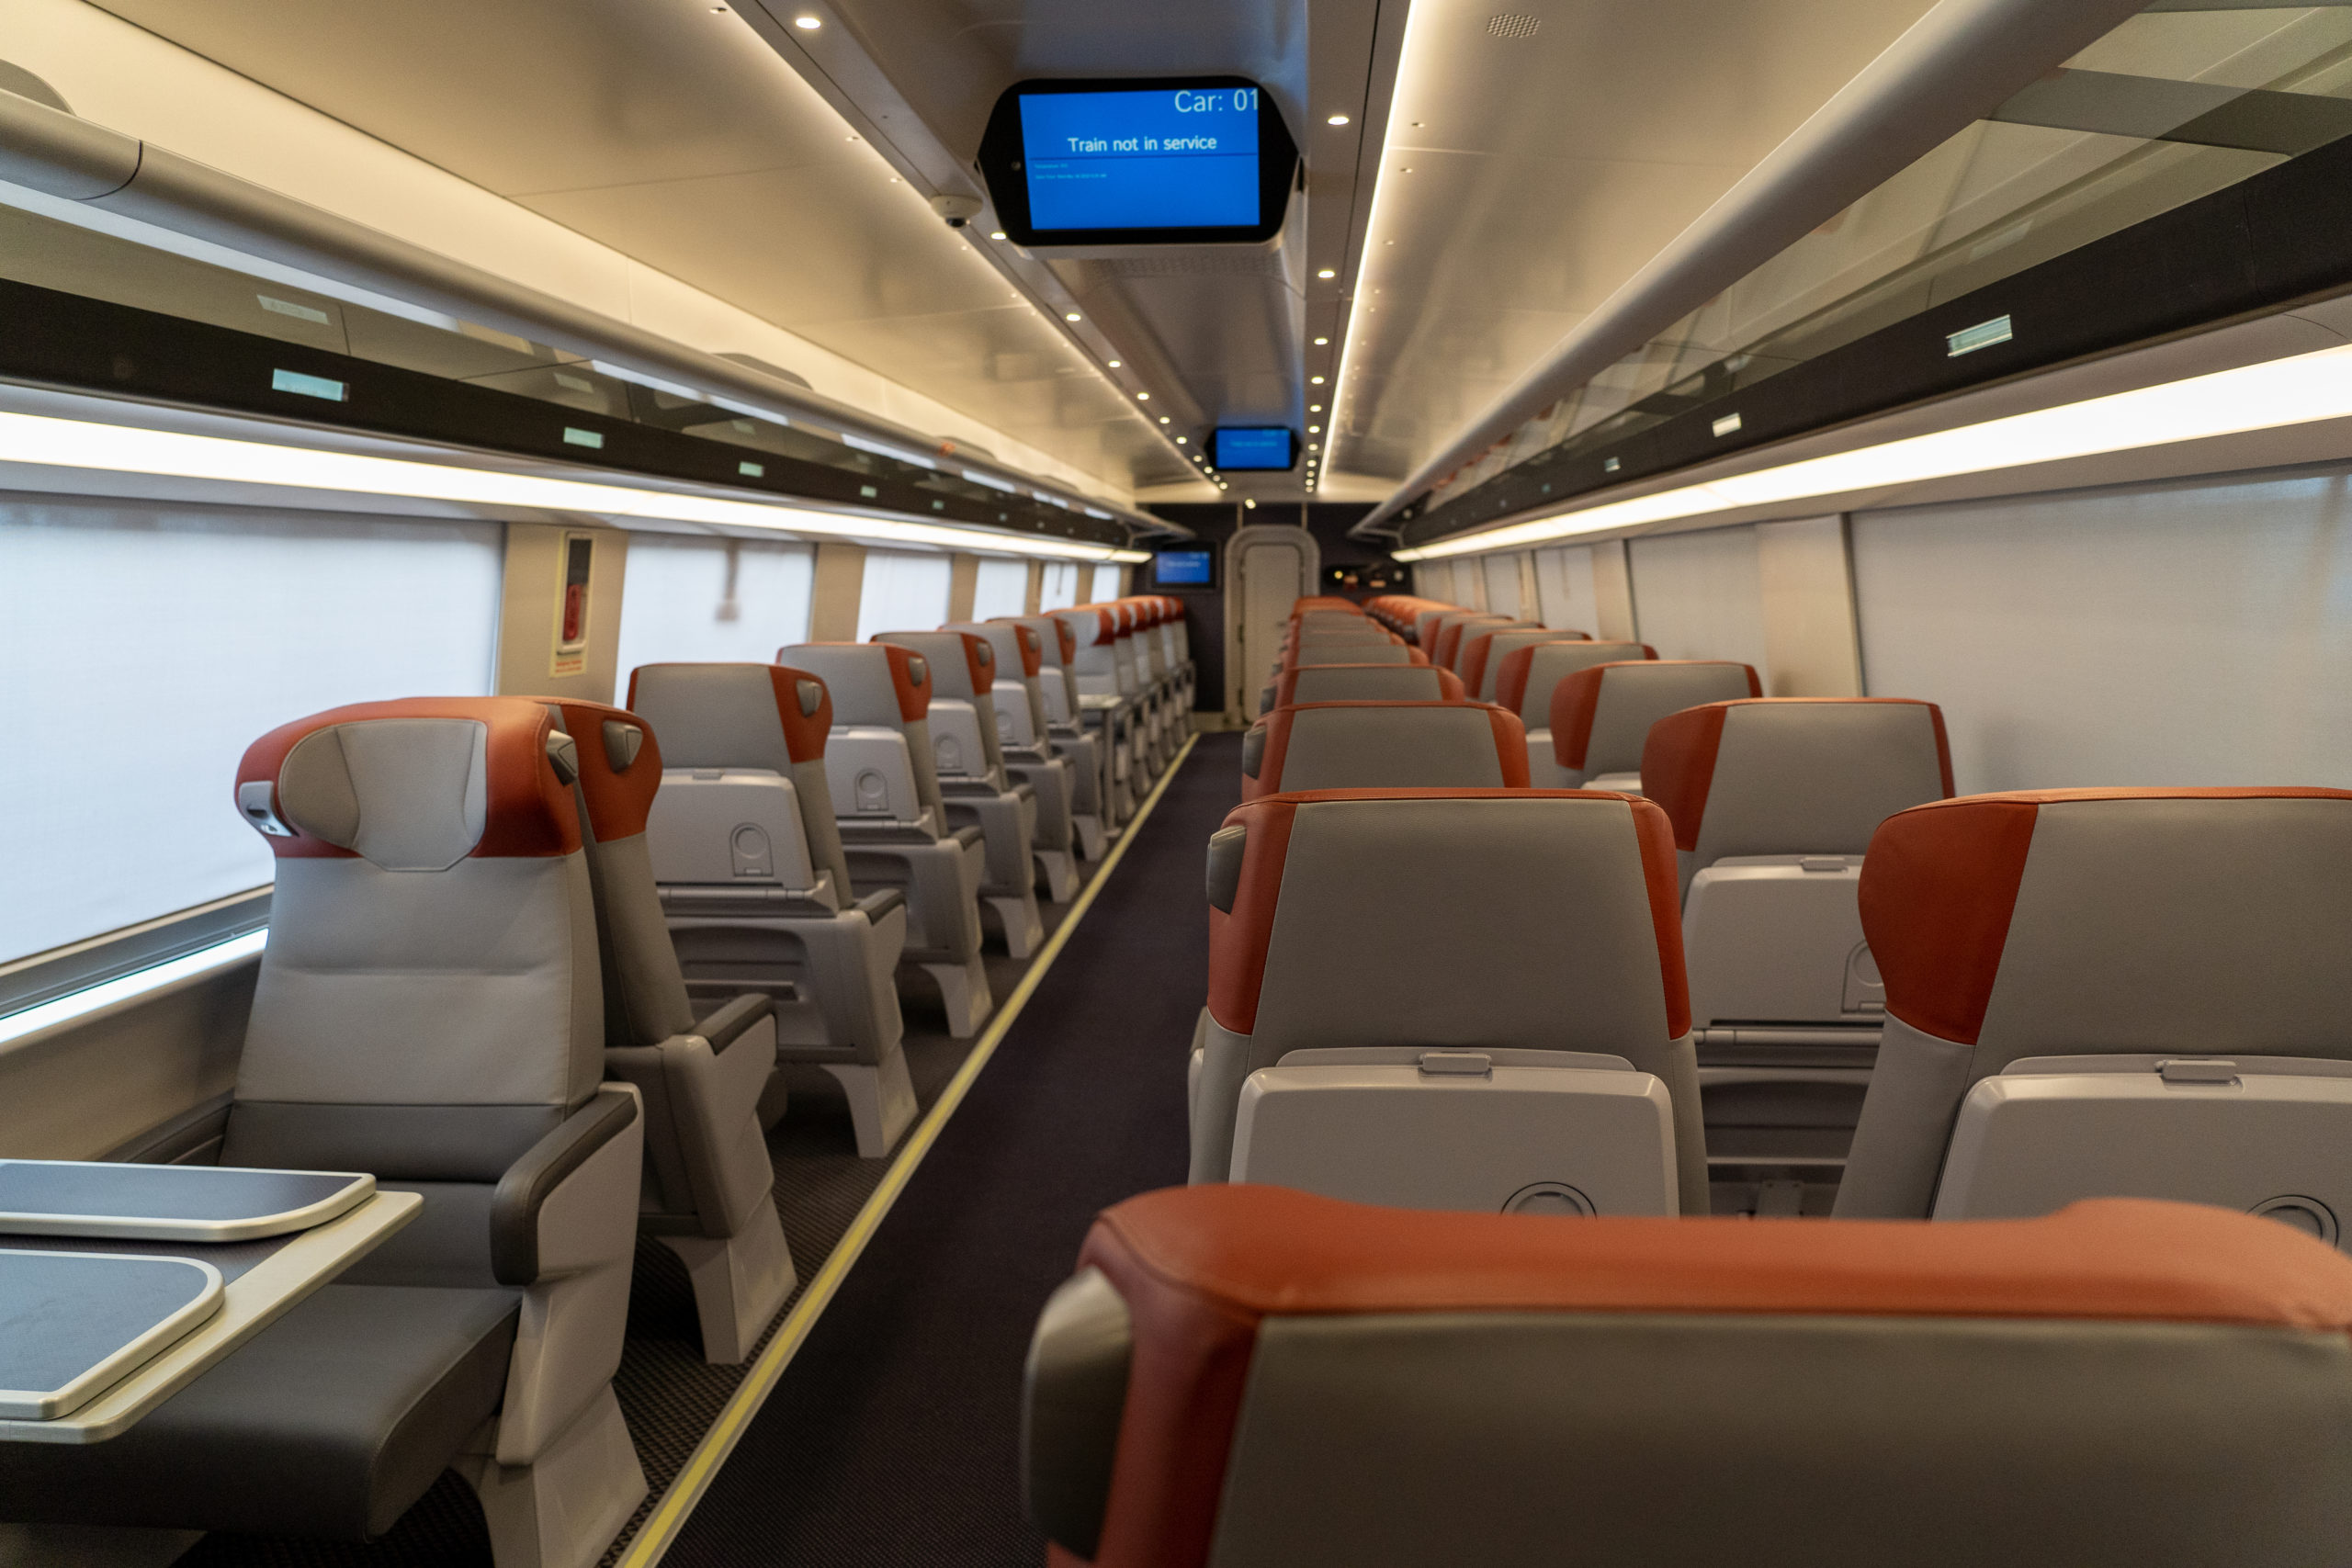 Photos of First-Class Cars on Trains Around the World